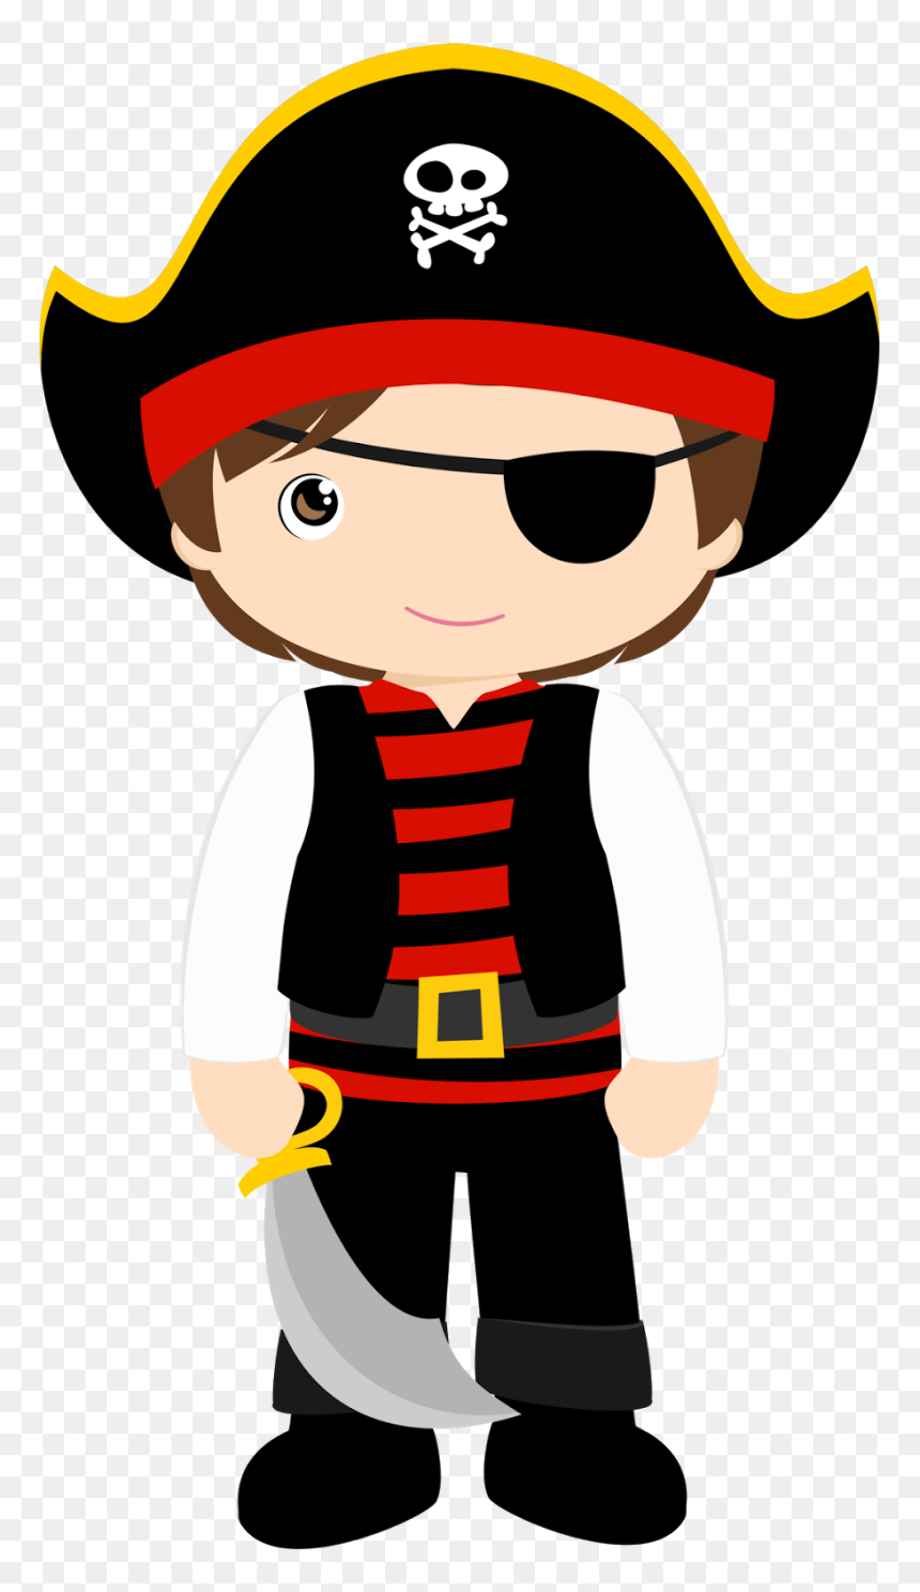 Pirates Clipart Cartoon And Other Clipart Images On Cliparts Pub My Xxx Hot Girl 